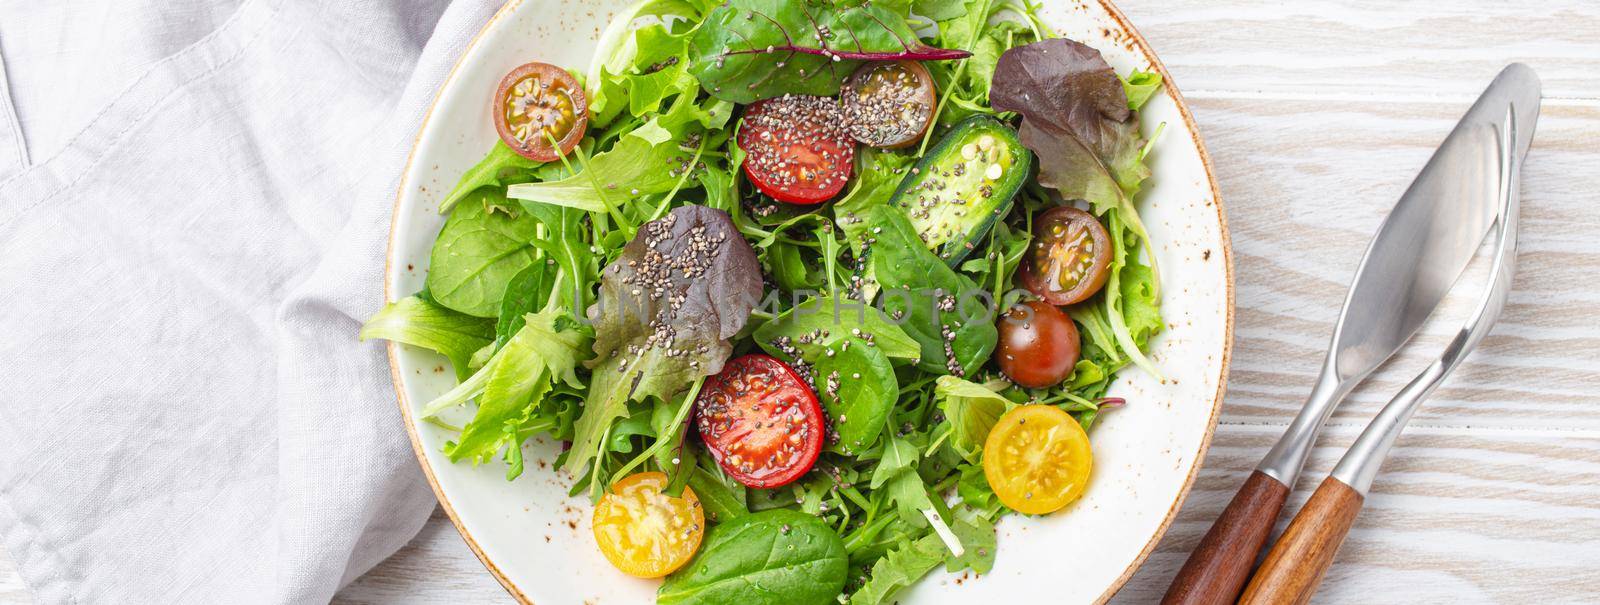 Vegetables vegetarian healthy salad with red yellow cherry tomatoes, green leafs and chia seeds on white plate on white wooden rustic background top view, healthy food and diet concept